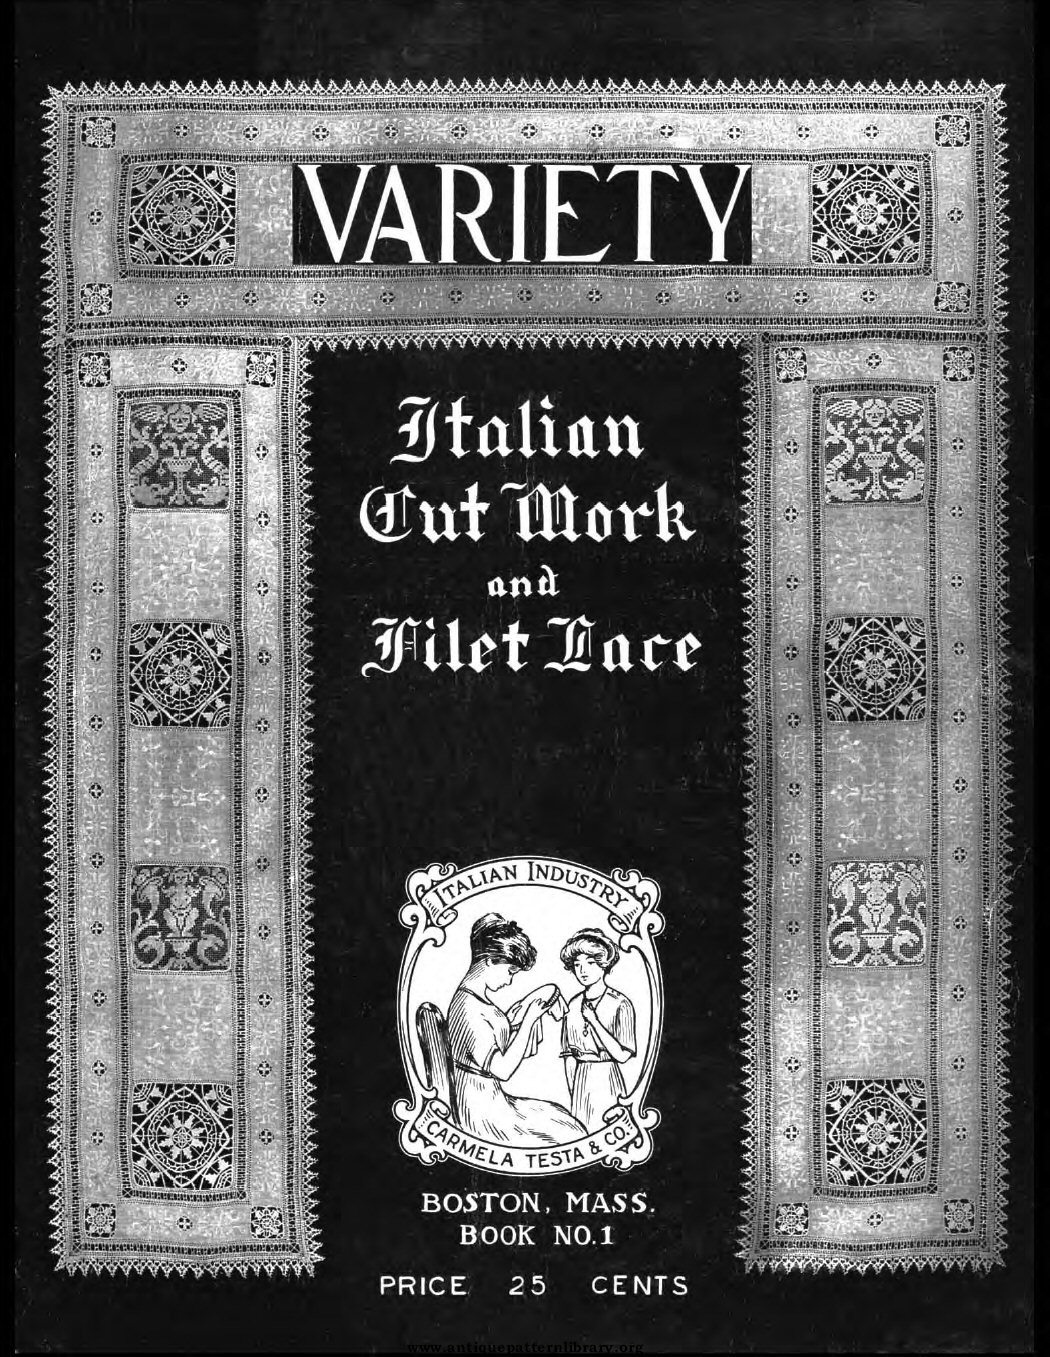 6-DA009 Variety Italian Cut Work and Filet Lace Book No. 1.